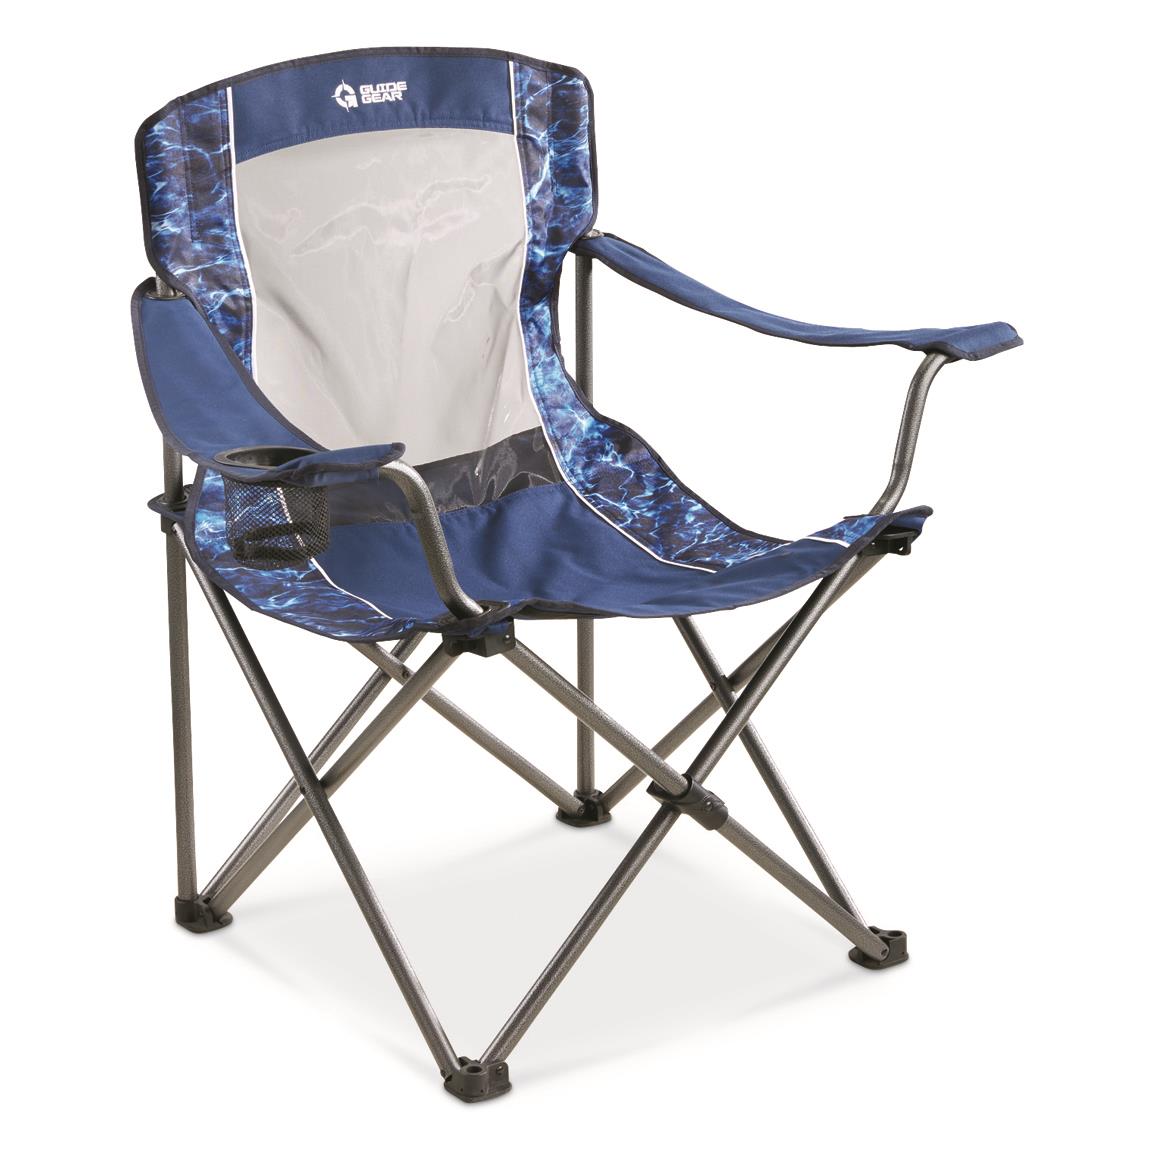 Greatland Basic Polyester Quad Chair W//Steel Frame /& Carrying Bag Weather Resist